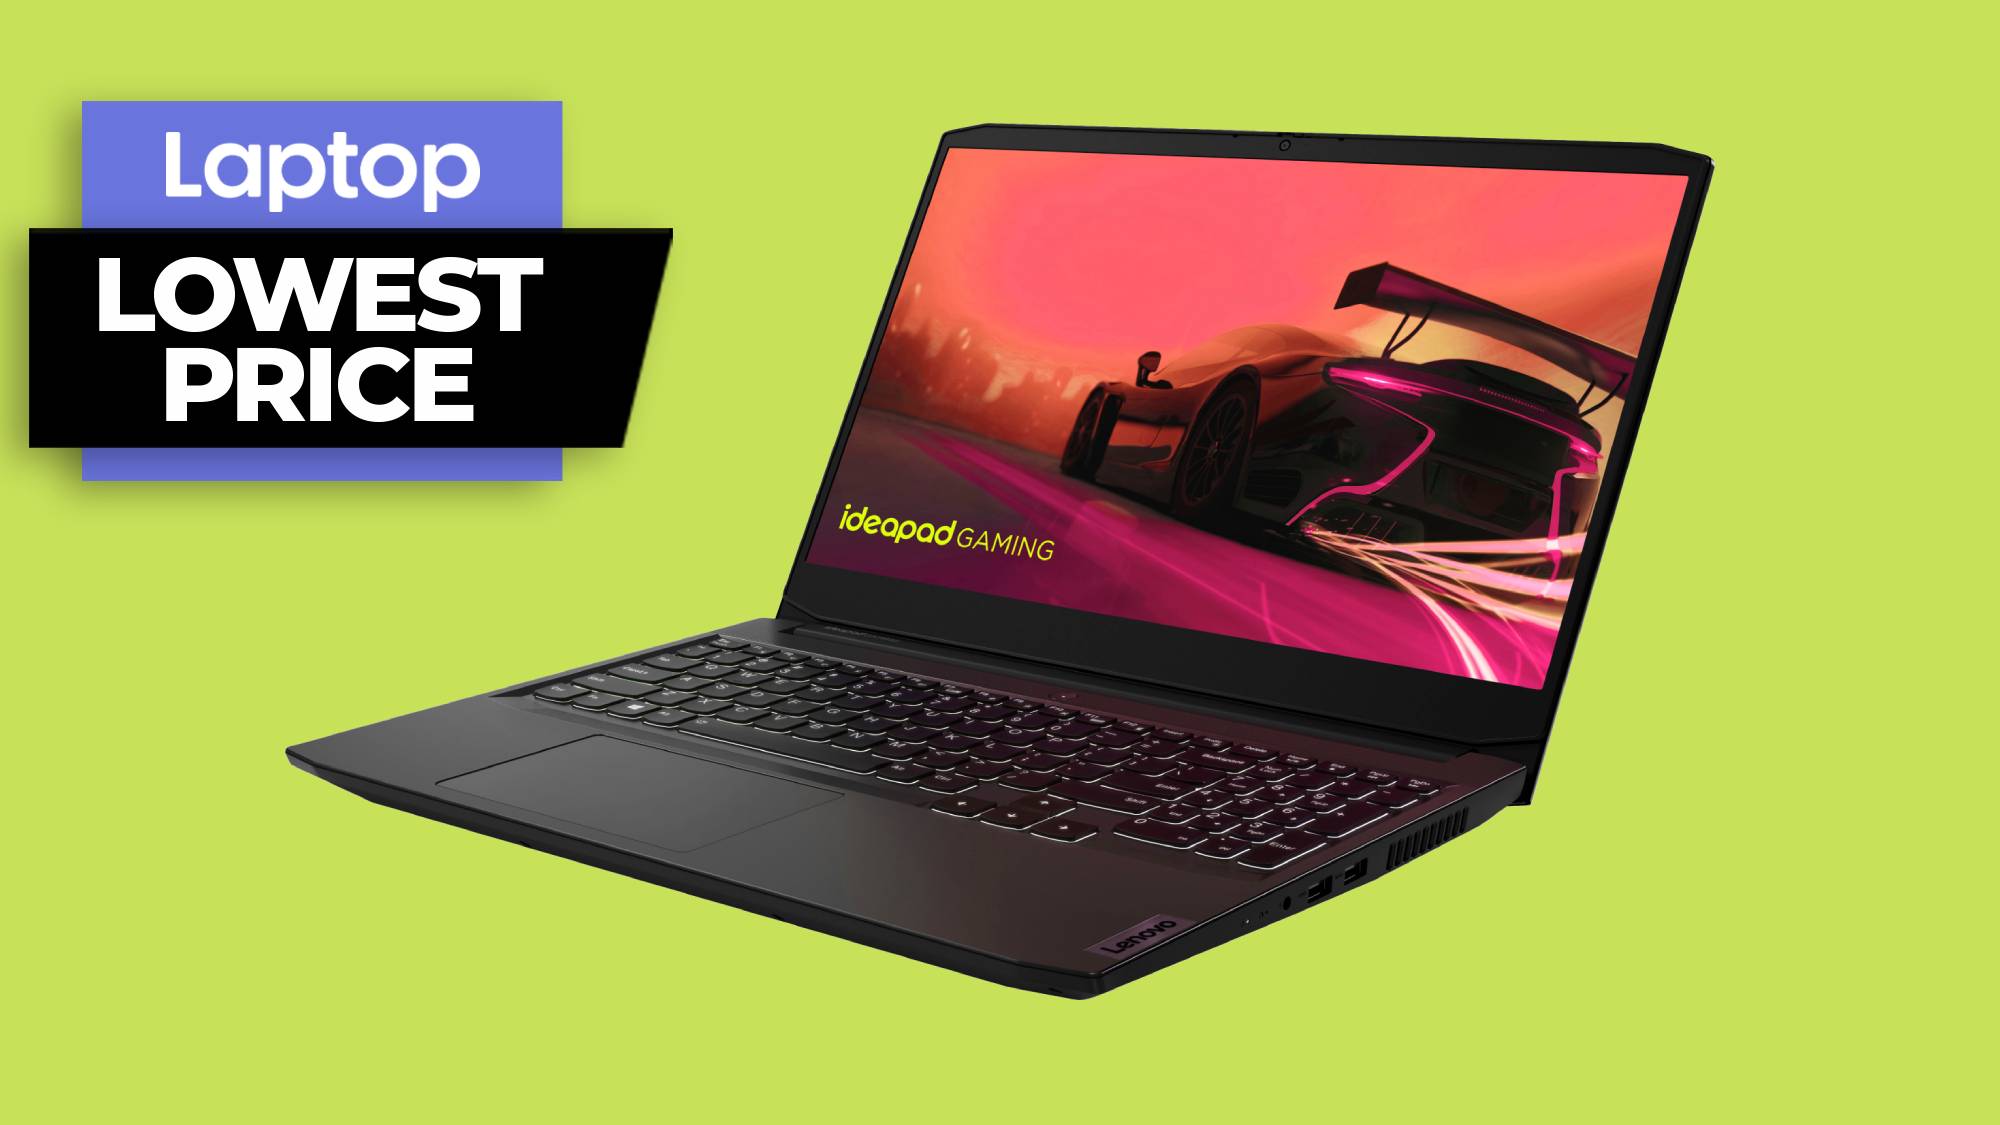 Lenovo IdeaPad Gaming laptop against a neon green background